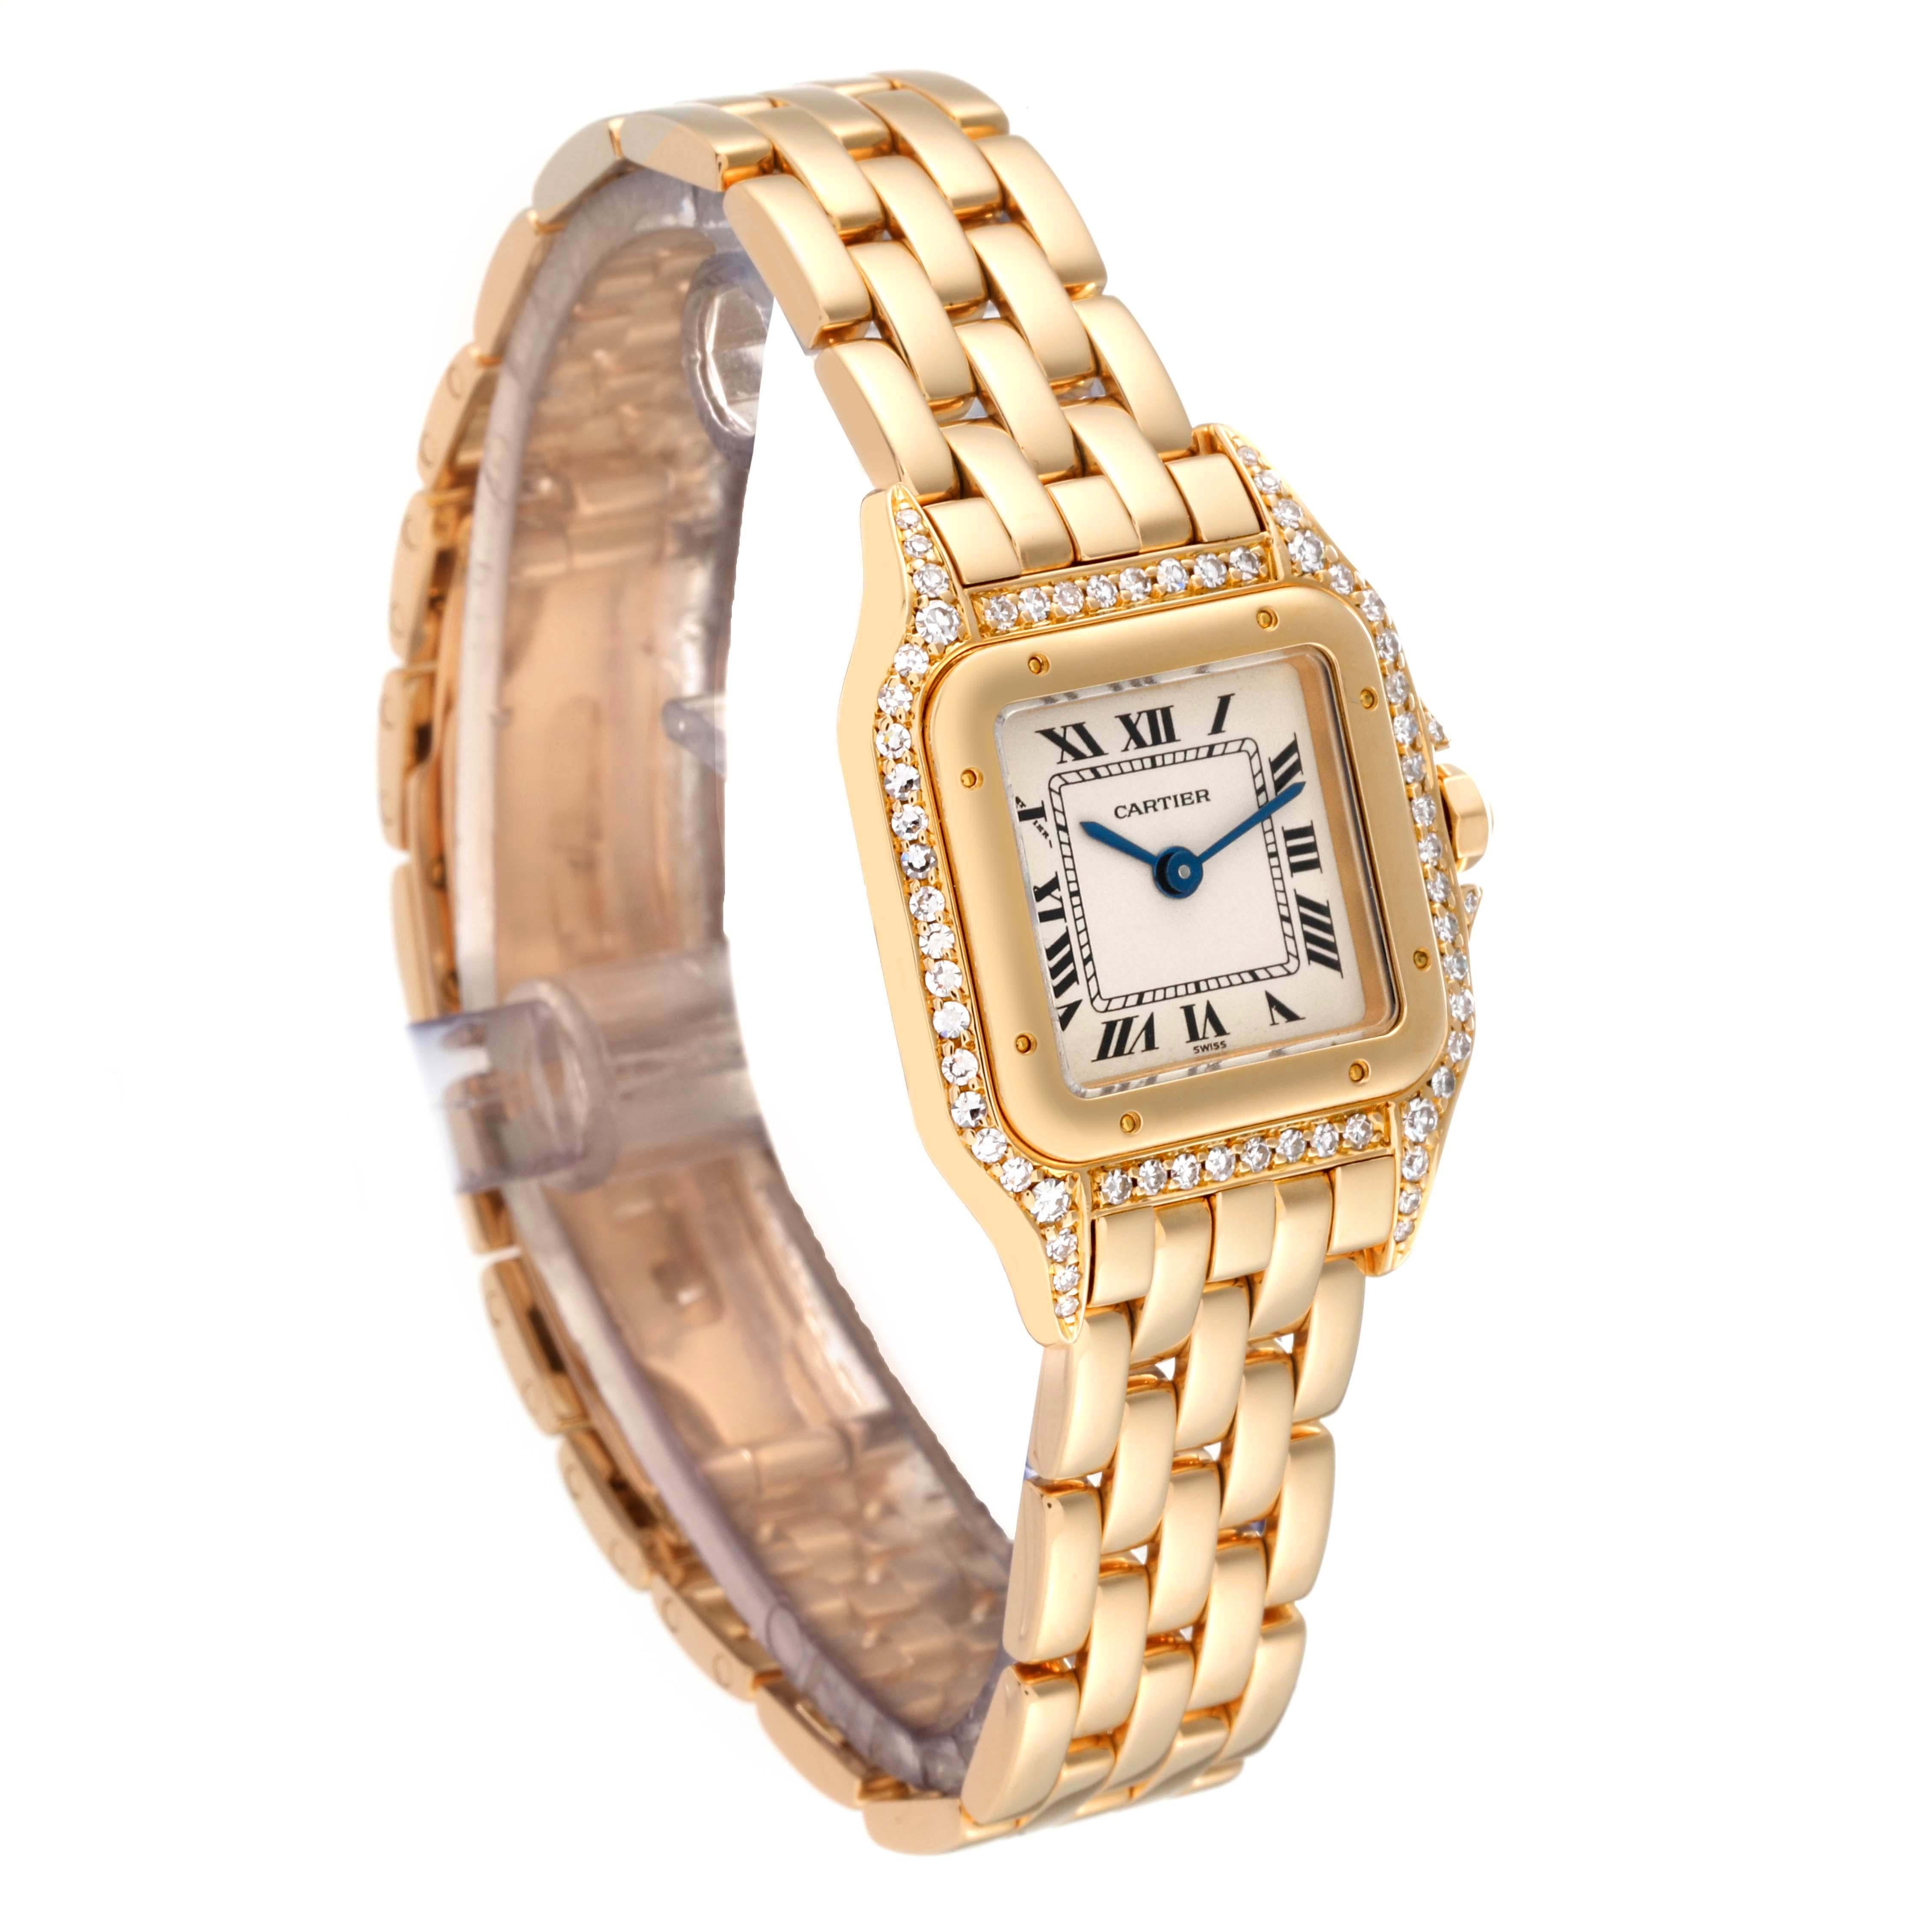 Cartier Panthere Small Yellow Gold Diamond Ladies Watch 17439 6